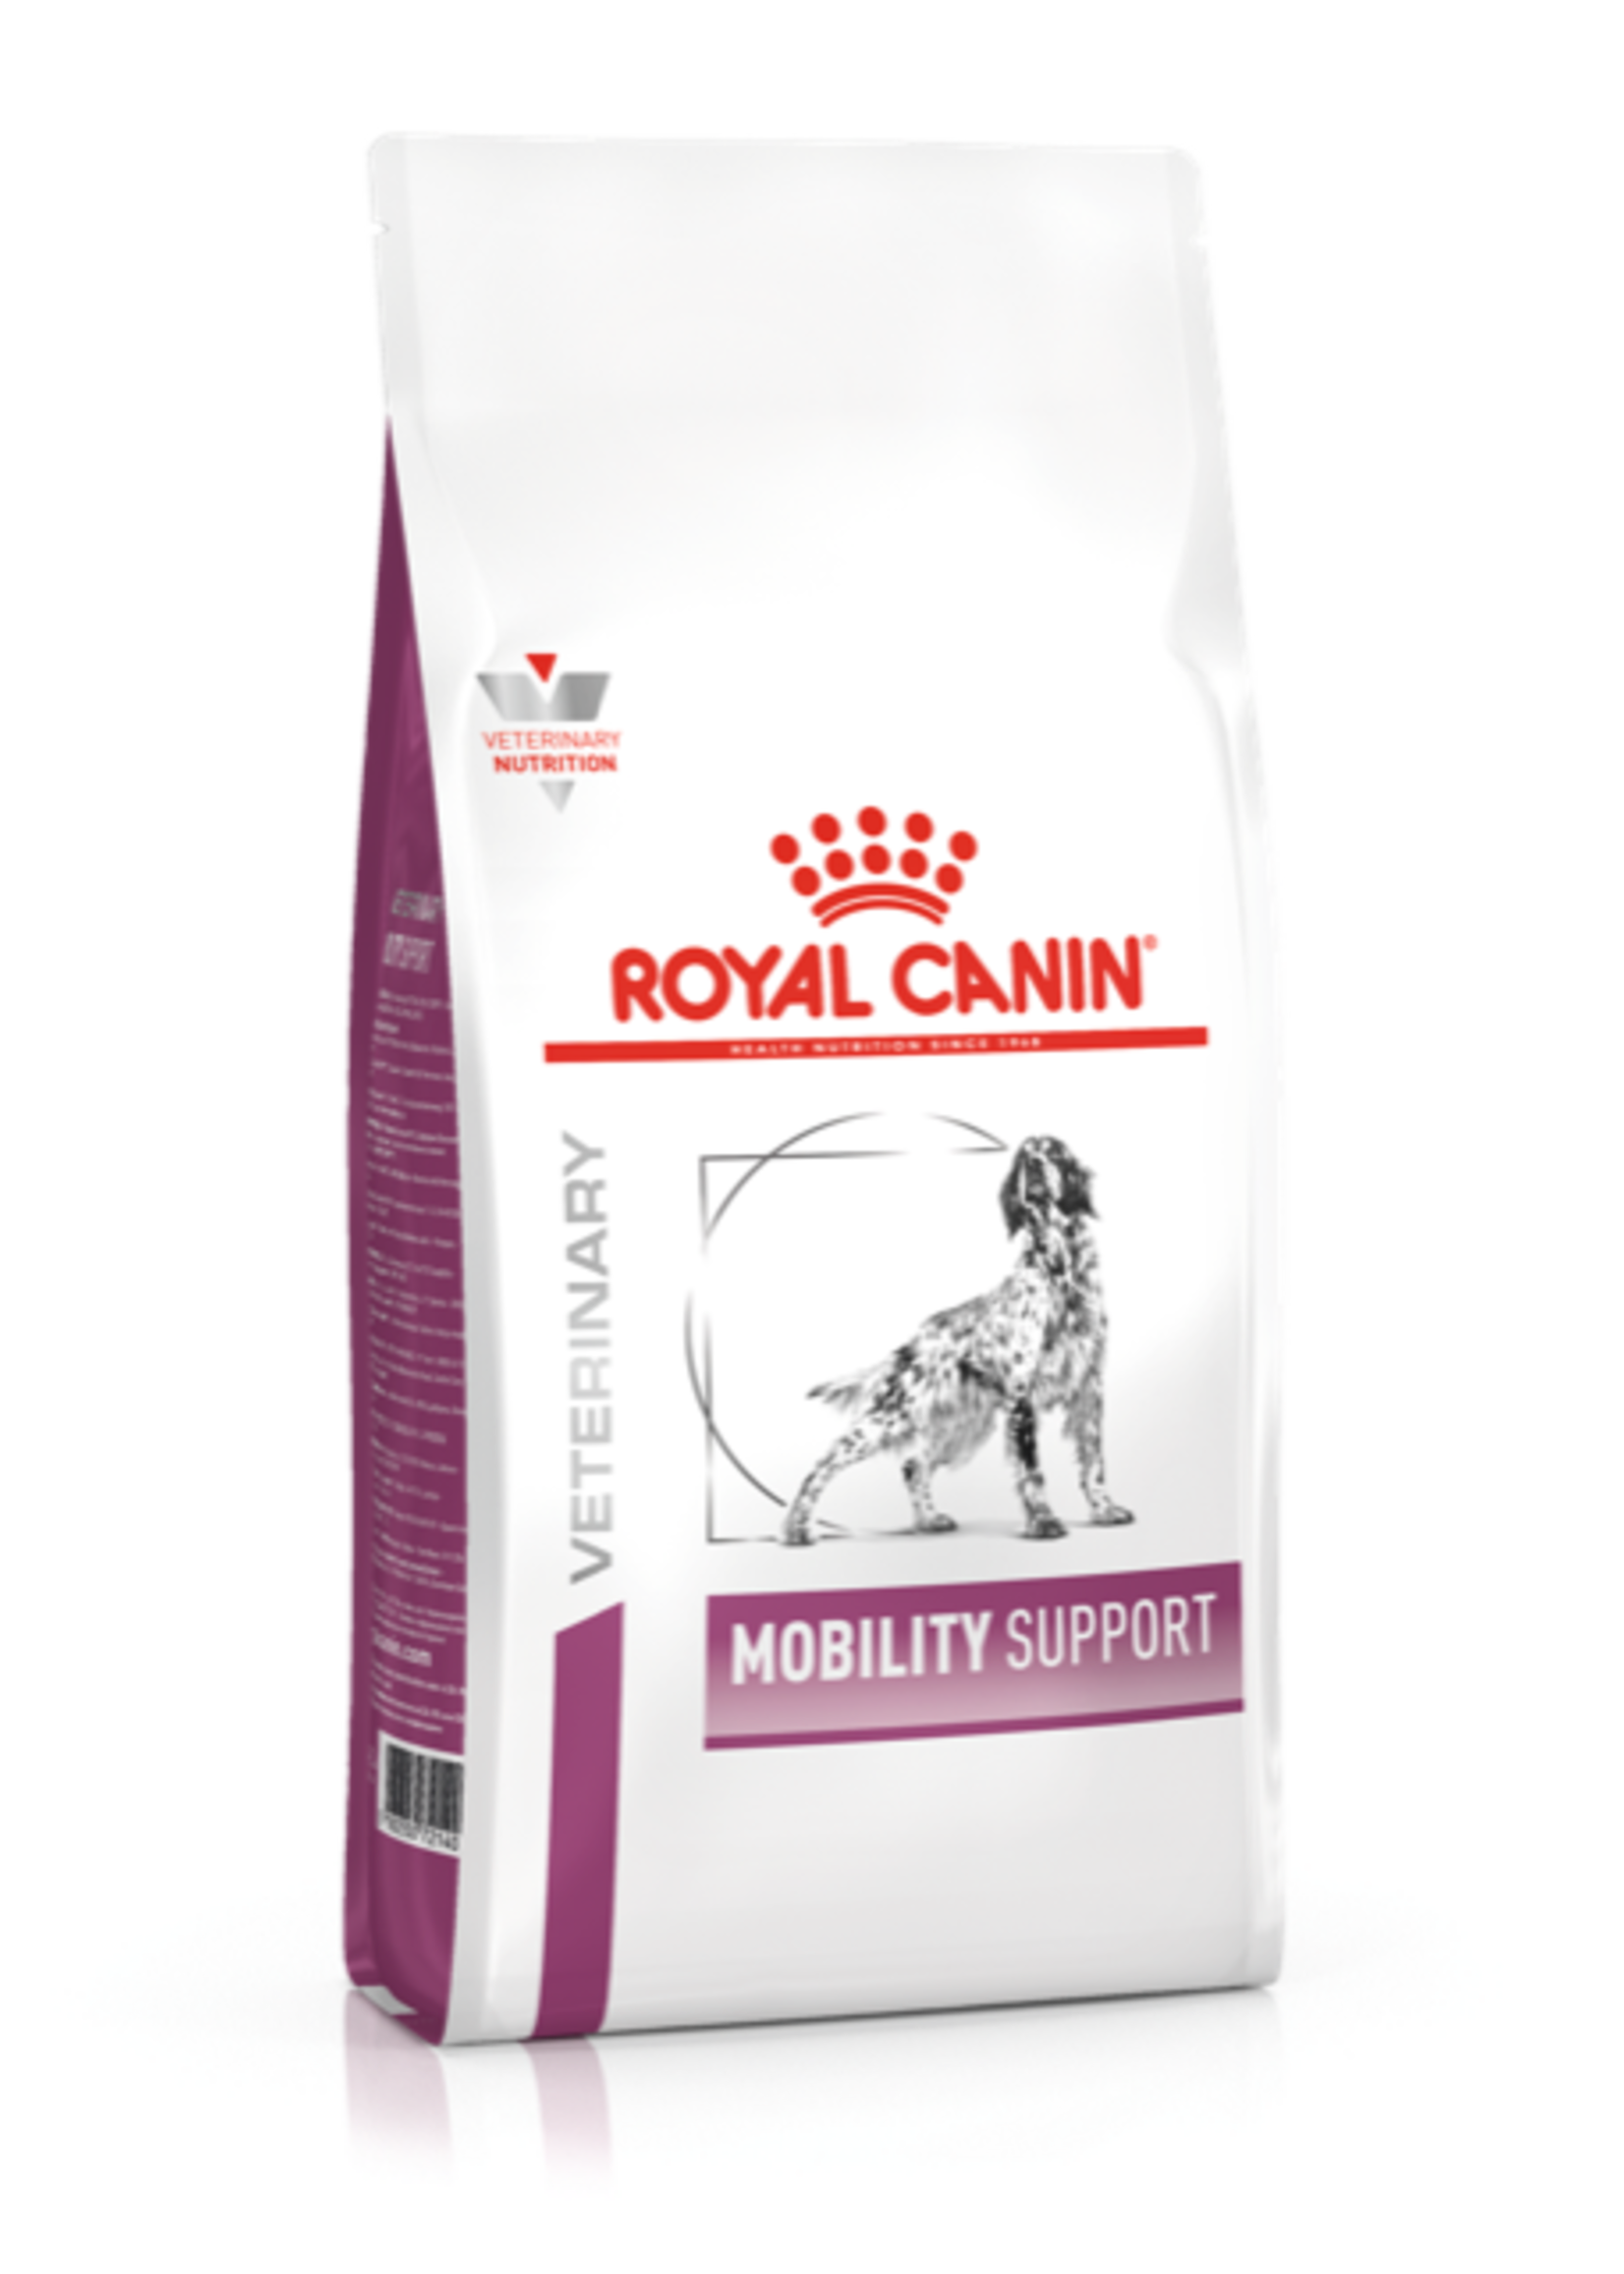 Royal Canin Royal Canin Vdiet Hund Mobility Support 7kg